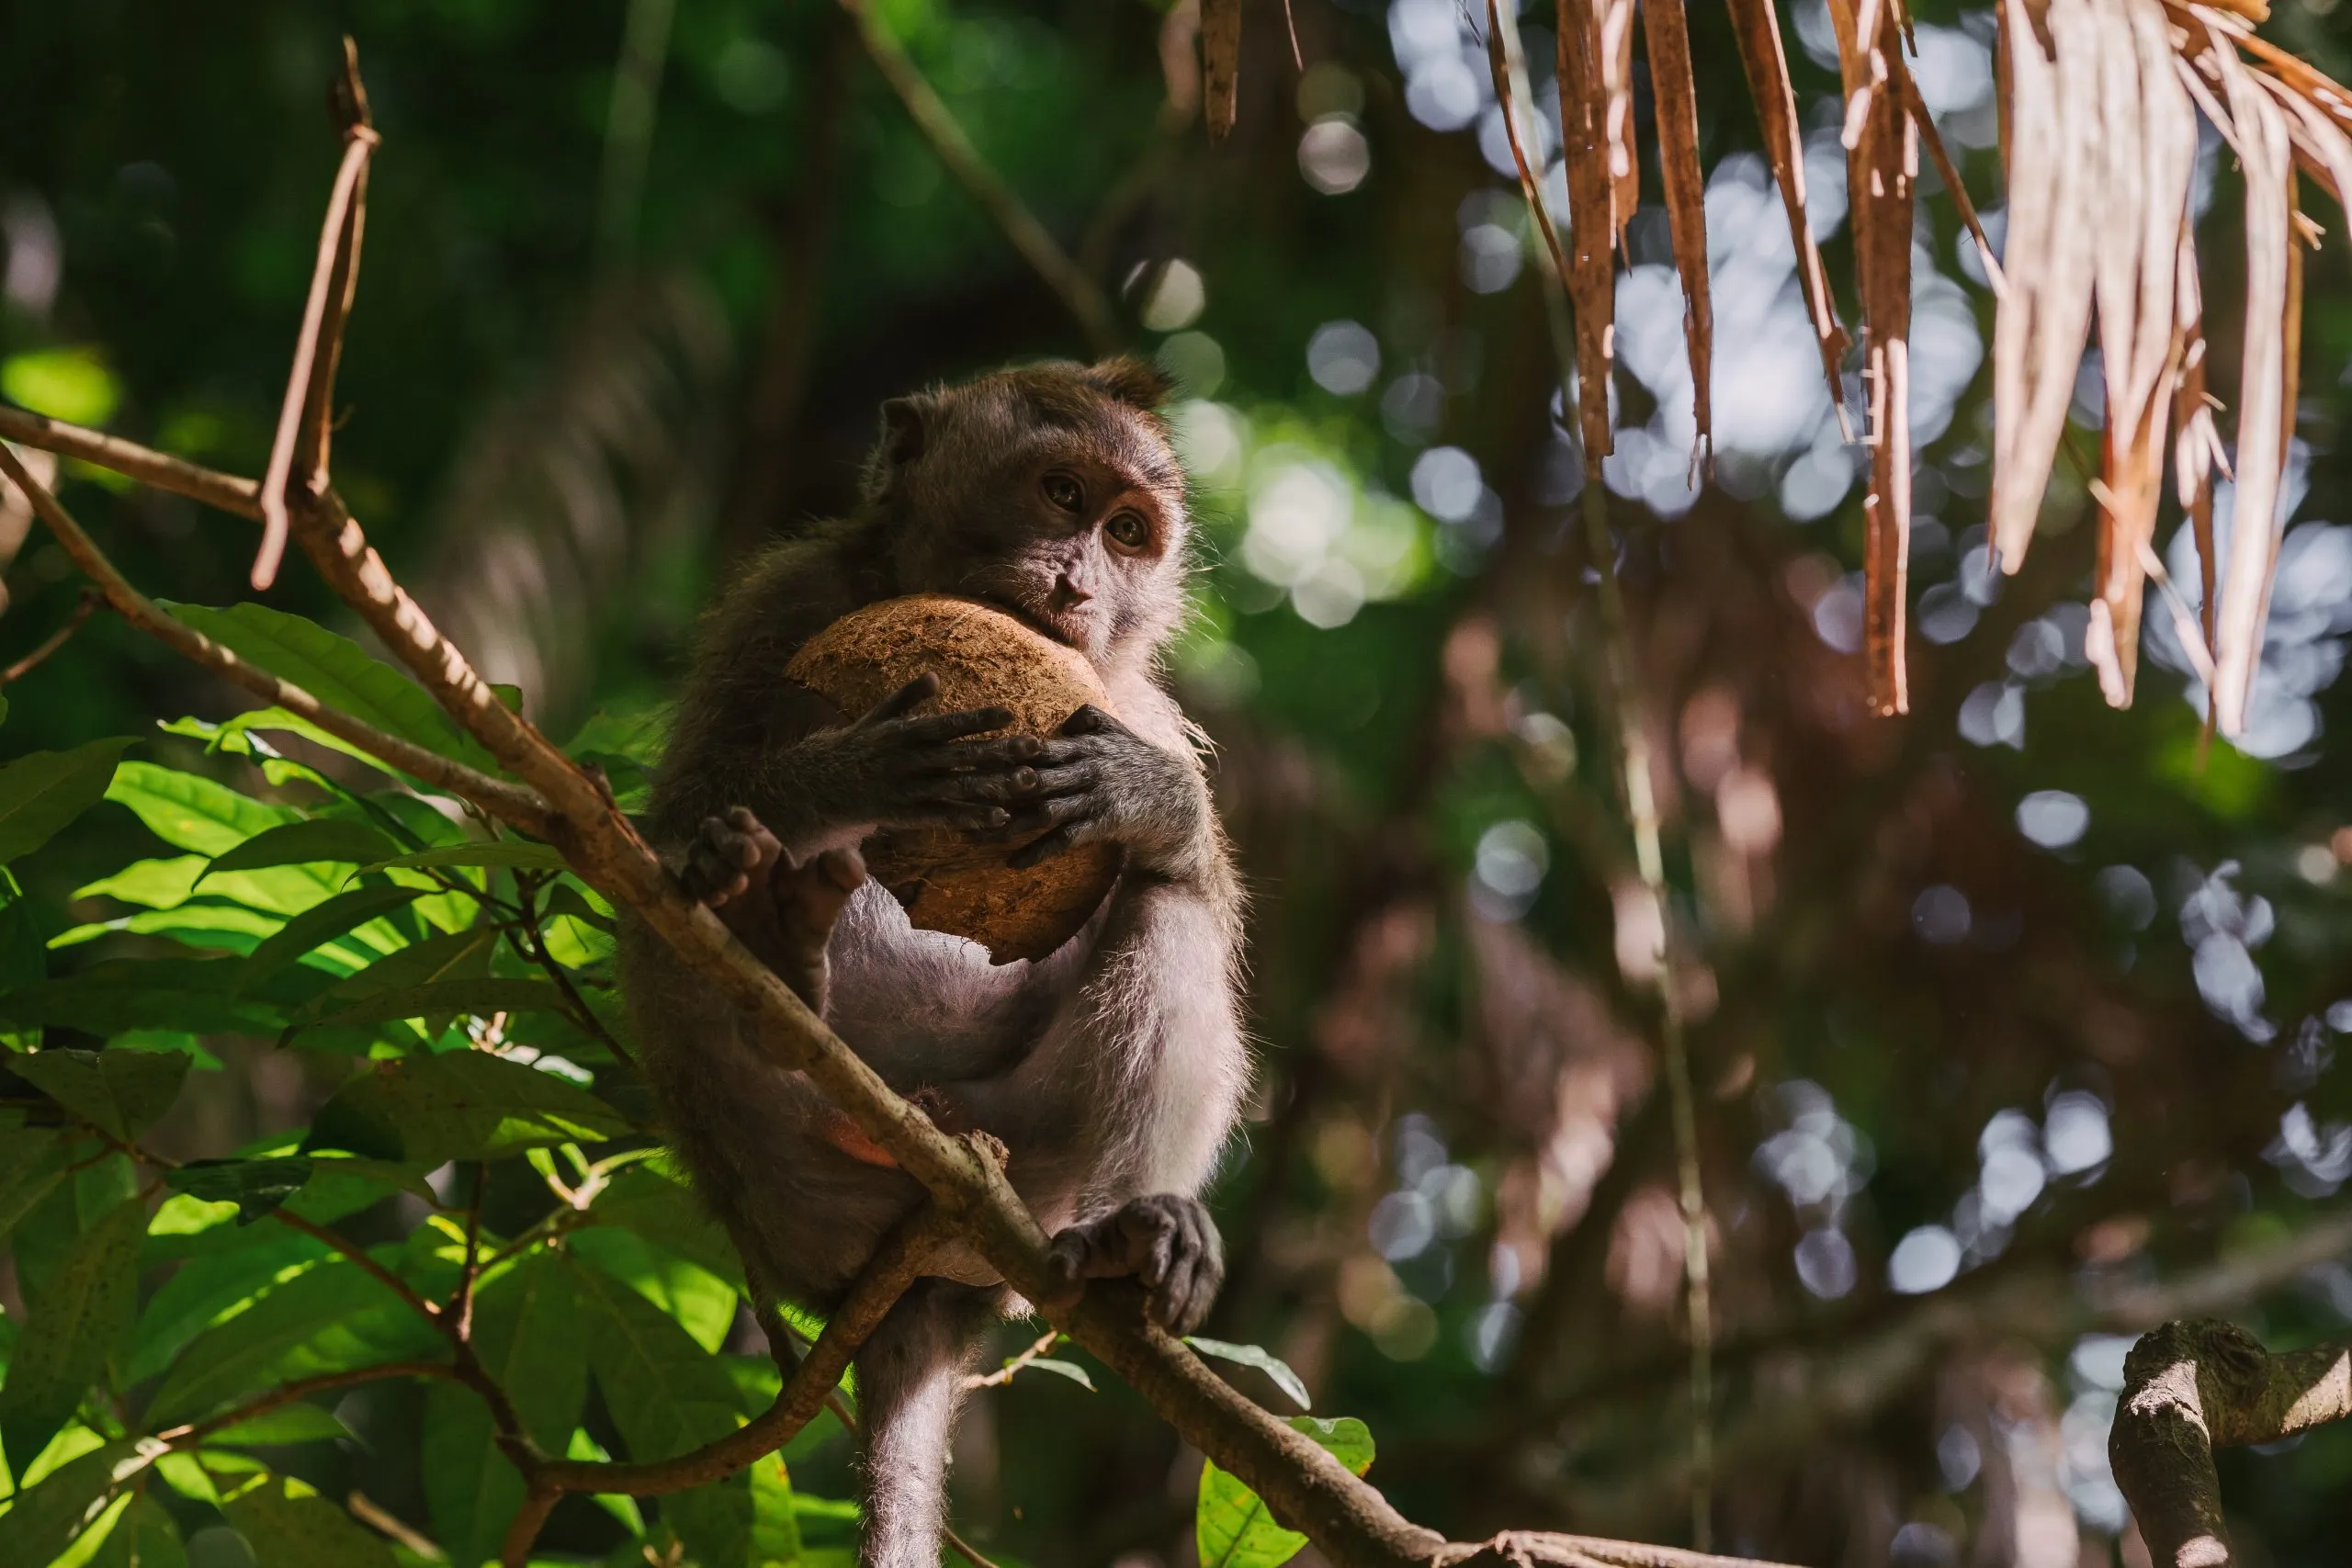 A small monkey with brown fur is perched on a tree branch, holding a coconut with both hands. The background is a lush, green forest with sunlight filtering through the leaves.